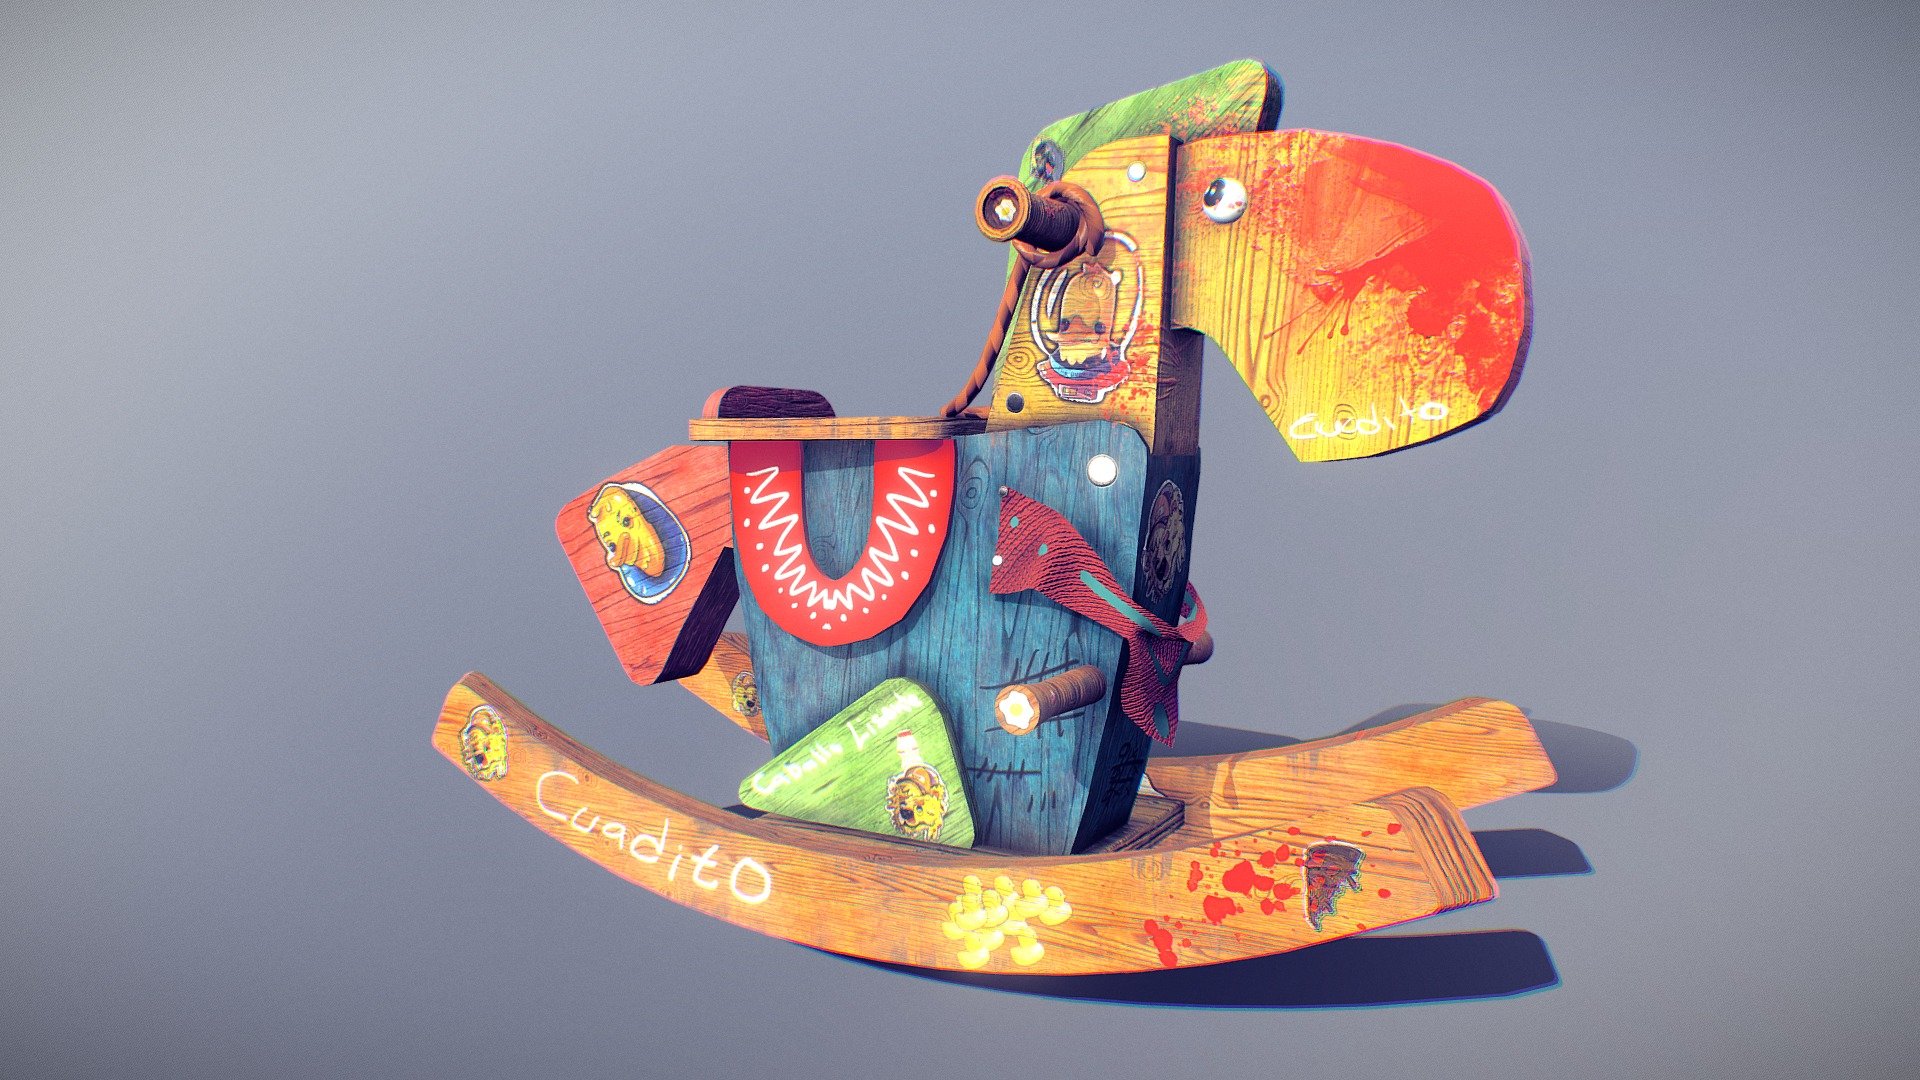 This little toy i made on blender and textured made on substance painter.
Had a lot of fun making this one!, feel free to download it!.
If you publish it somewhere, just tag me @cuadot - WoodToy Horse! - Download Free 3D model by cuadot.fbx (@cuadot) 3d model